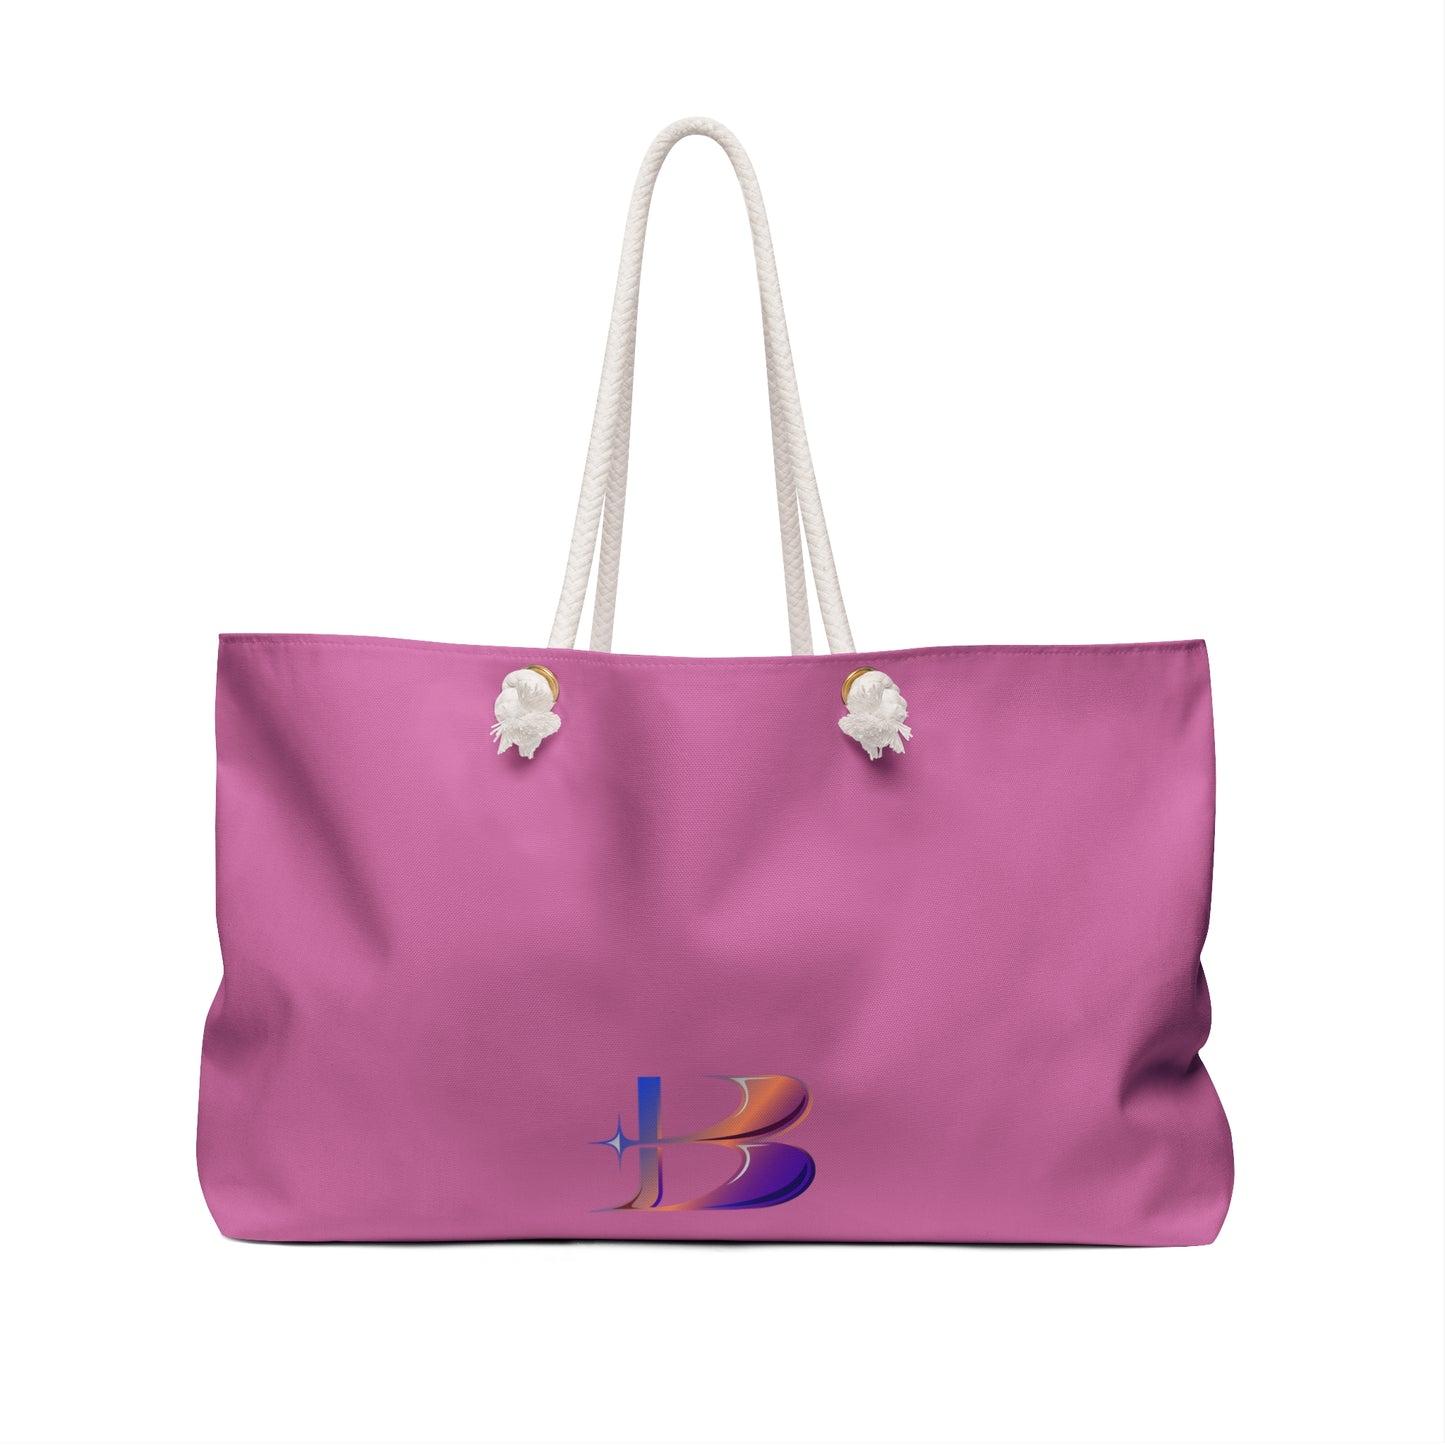 Red Tulips Weekender Bag (SP Photography Collection) LIGHT PINK